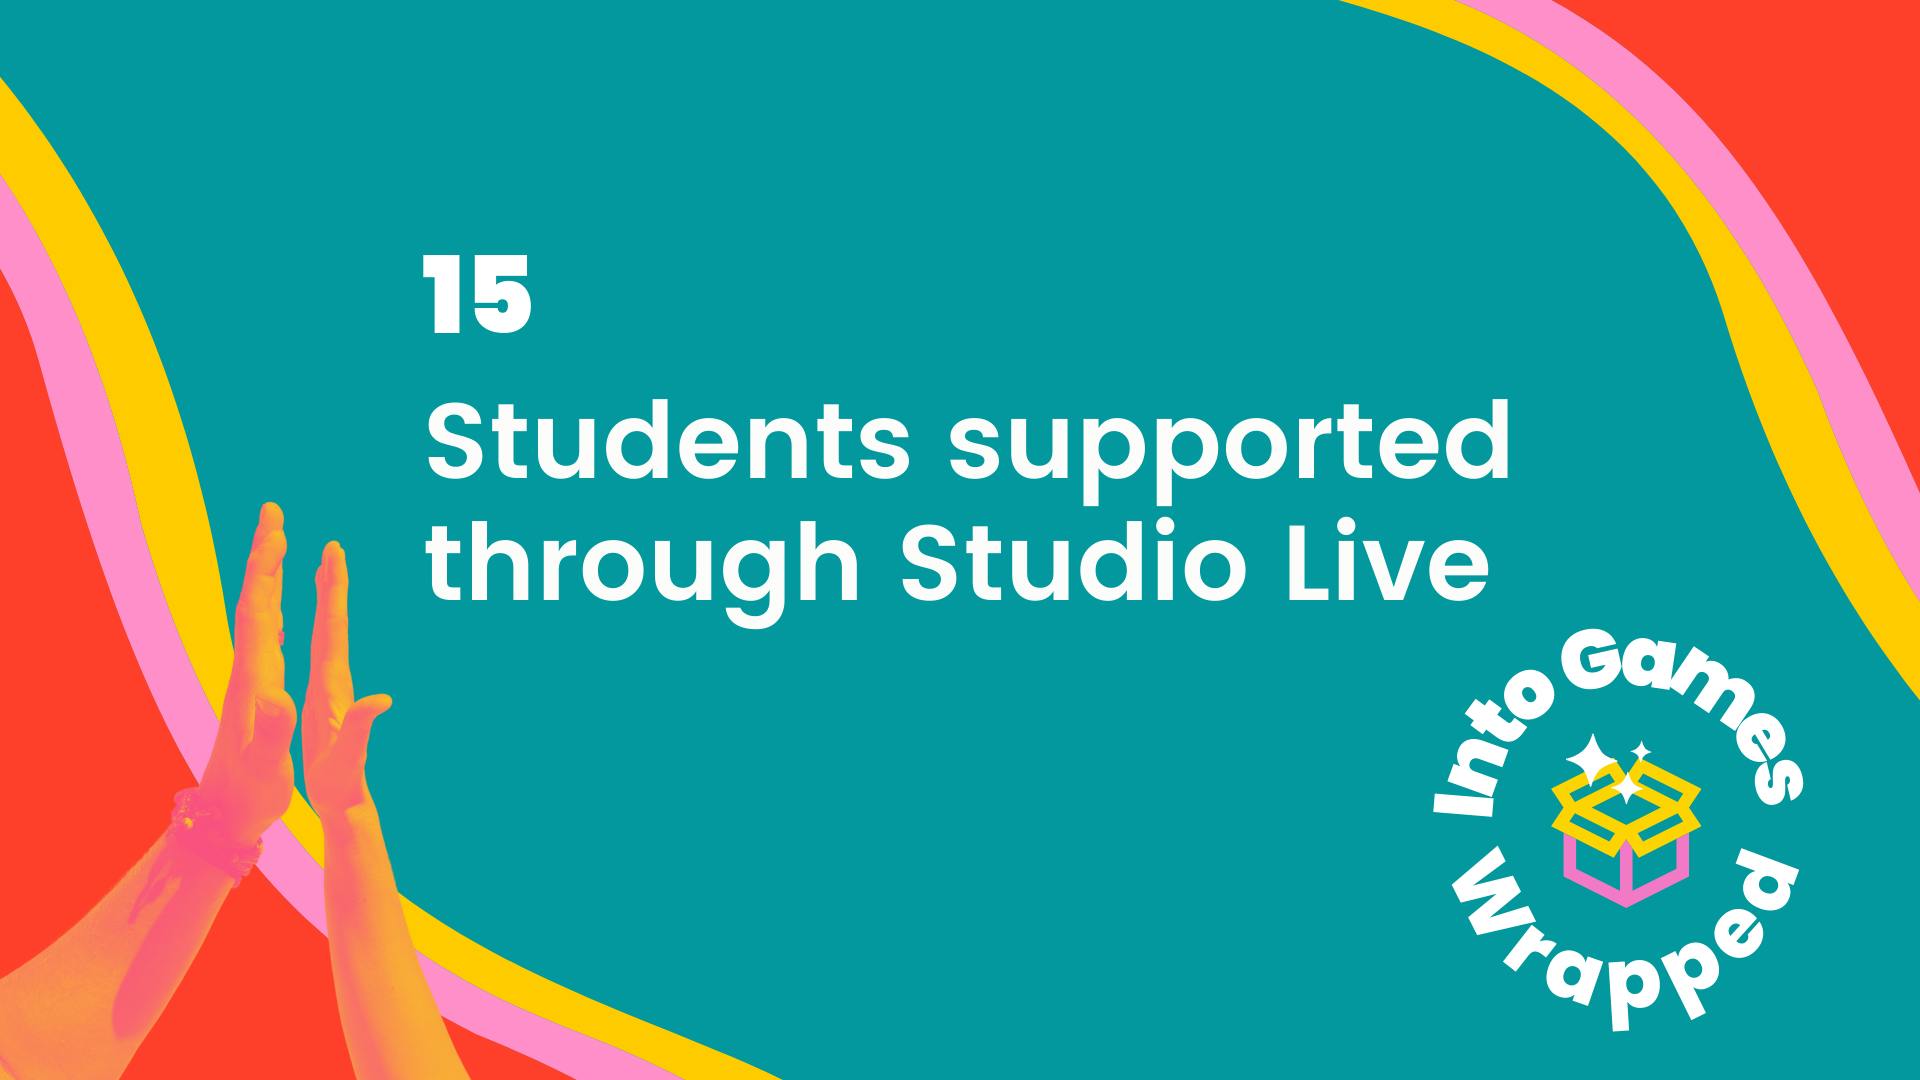 15 students supported through Studio Live